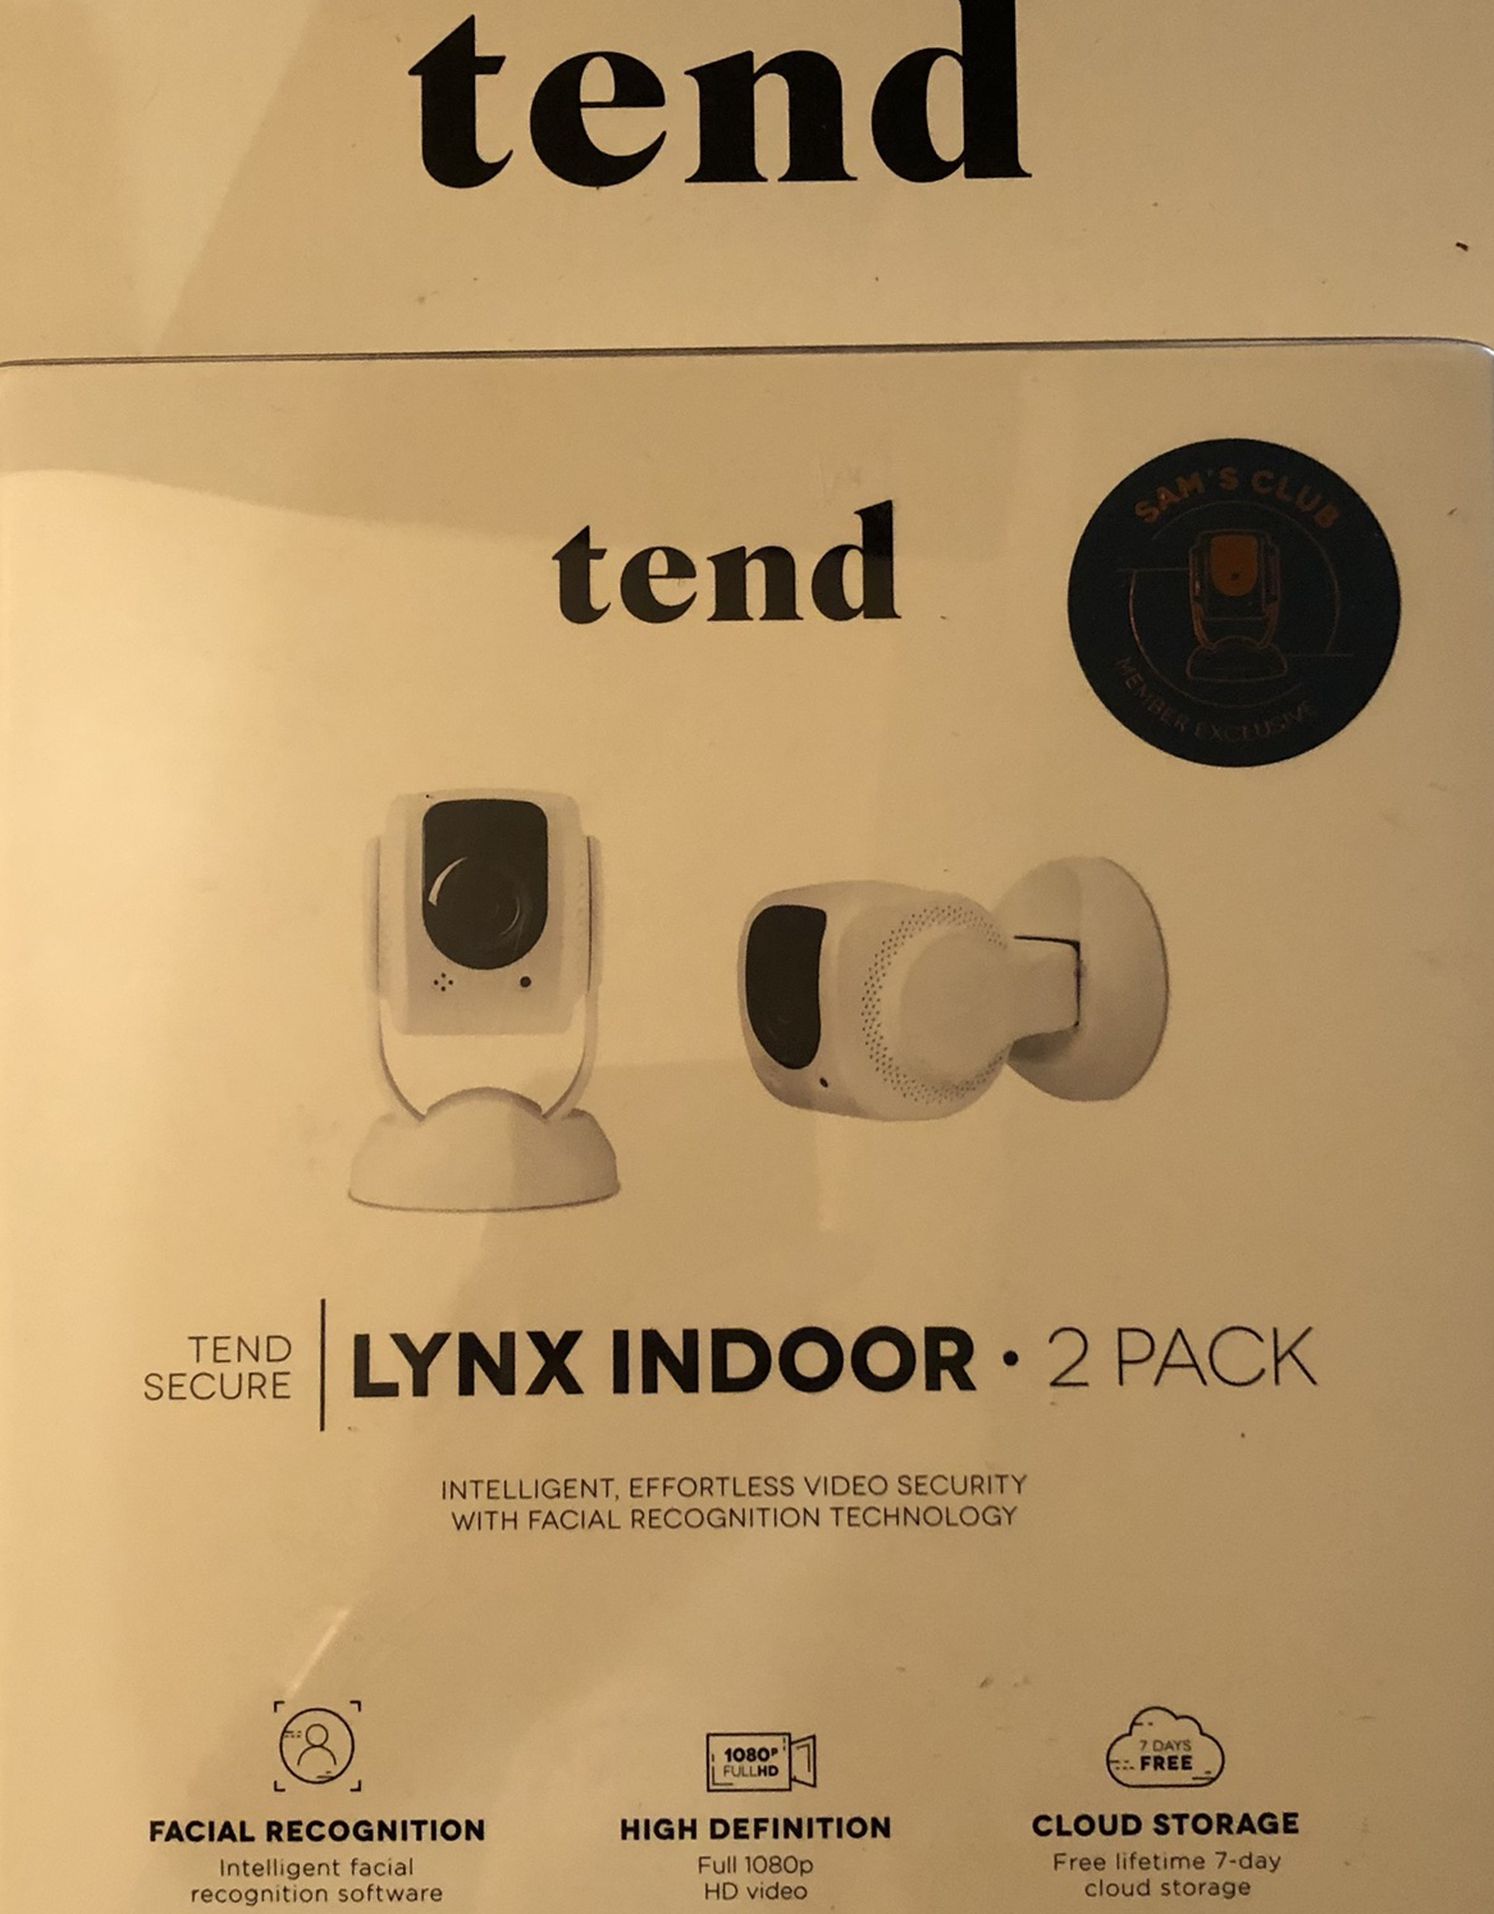 Tend Secure Lynx Indoor Intelligent Video Security with Facial Recognition (2 Pack)